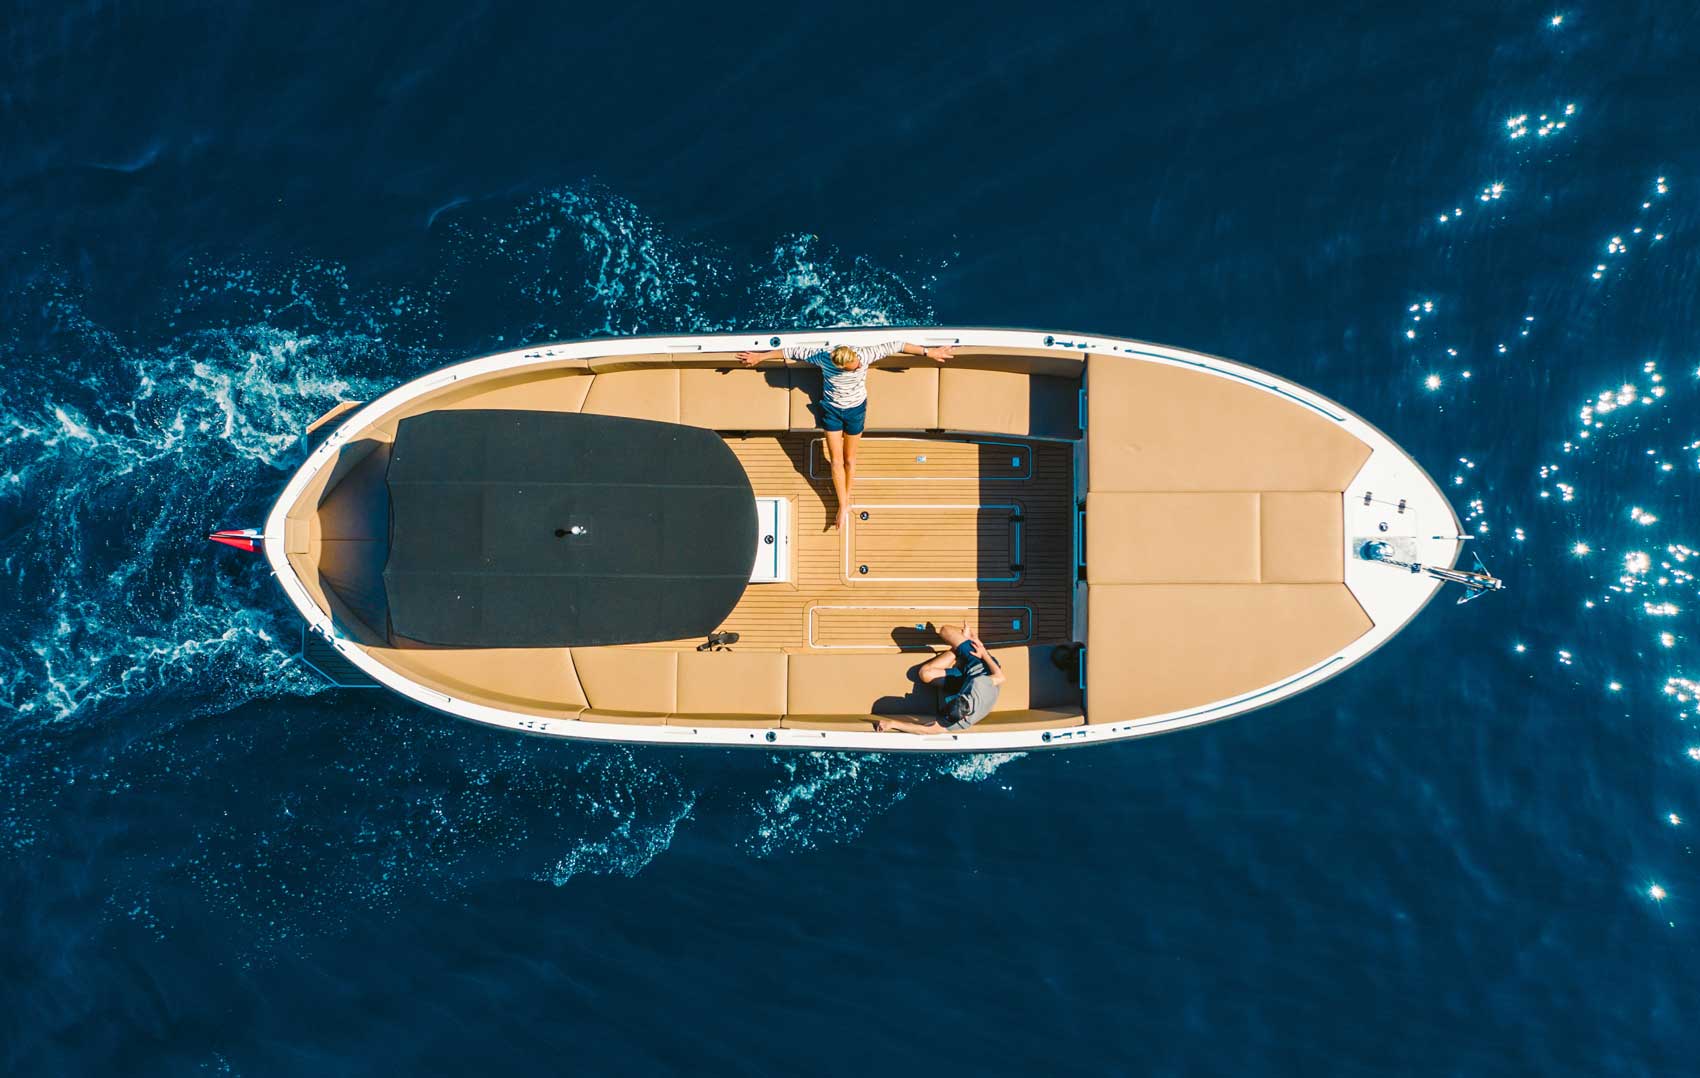 Overhead view of a boat with two passengers on the water